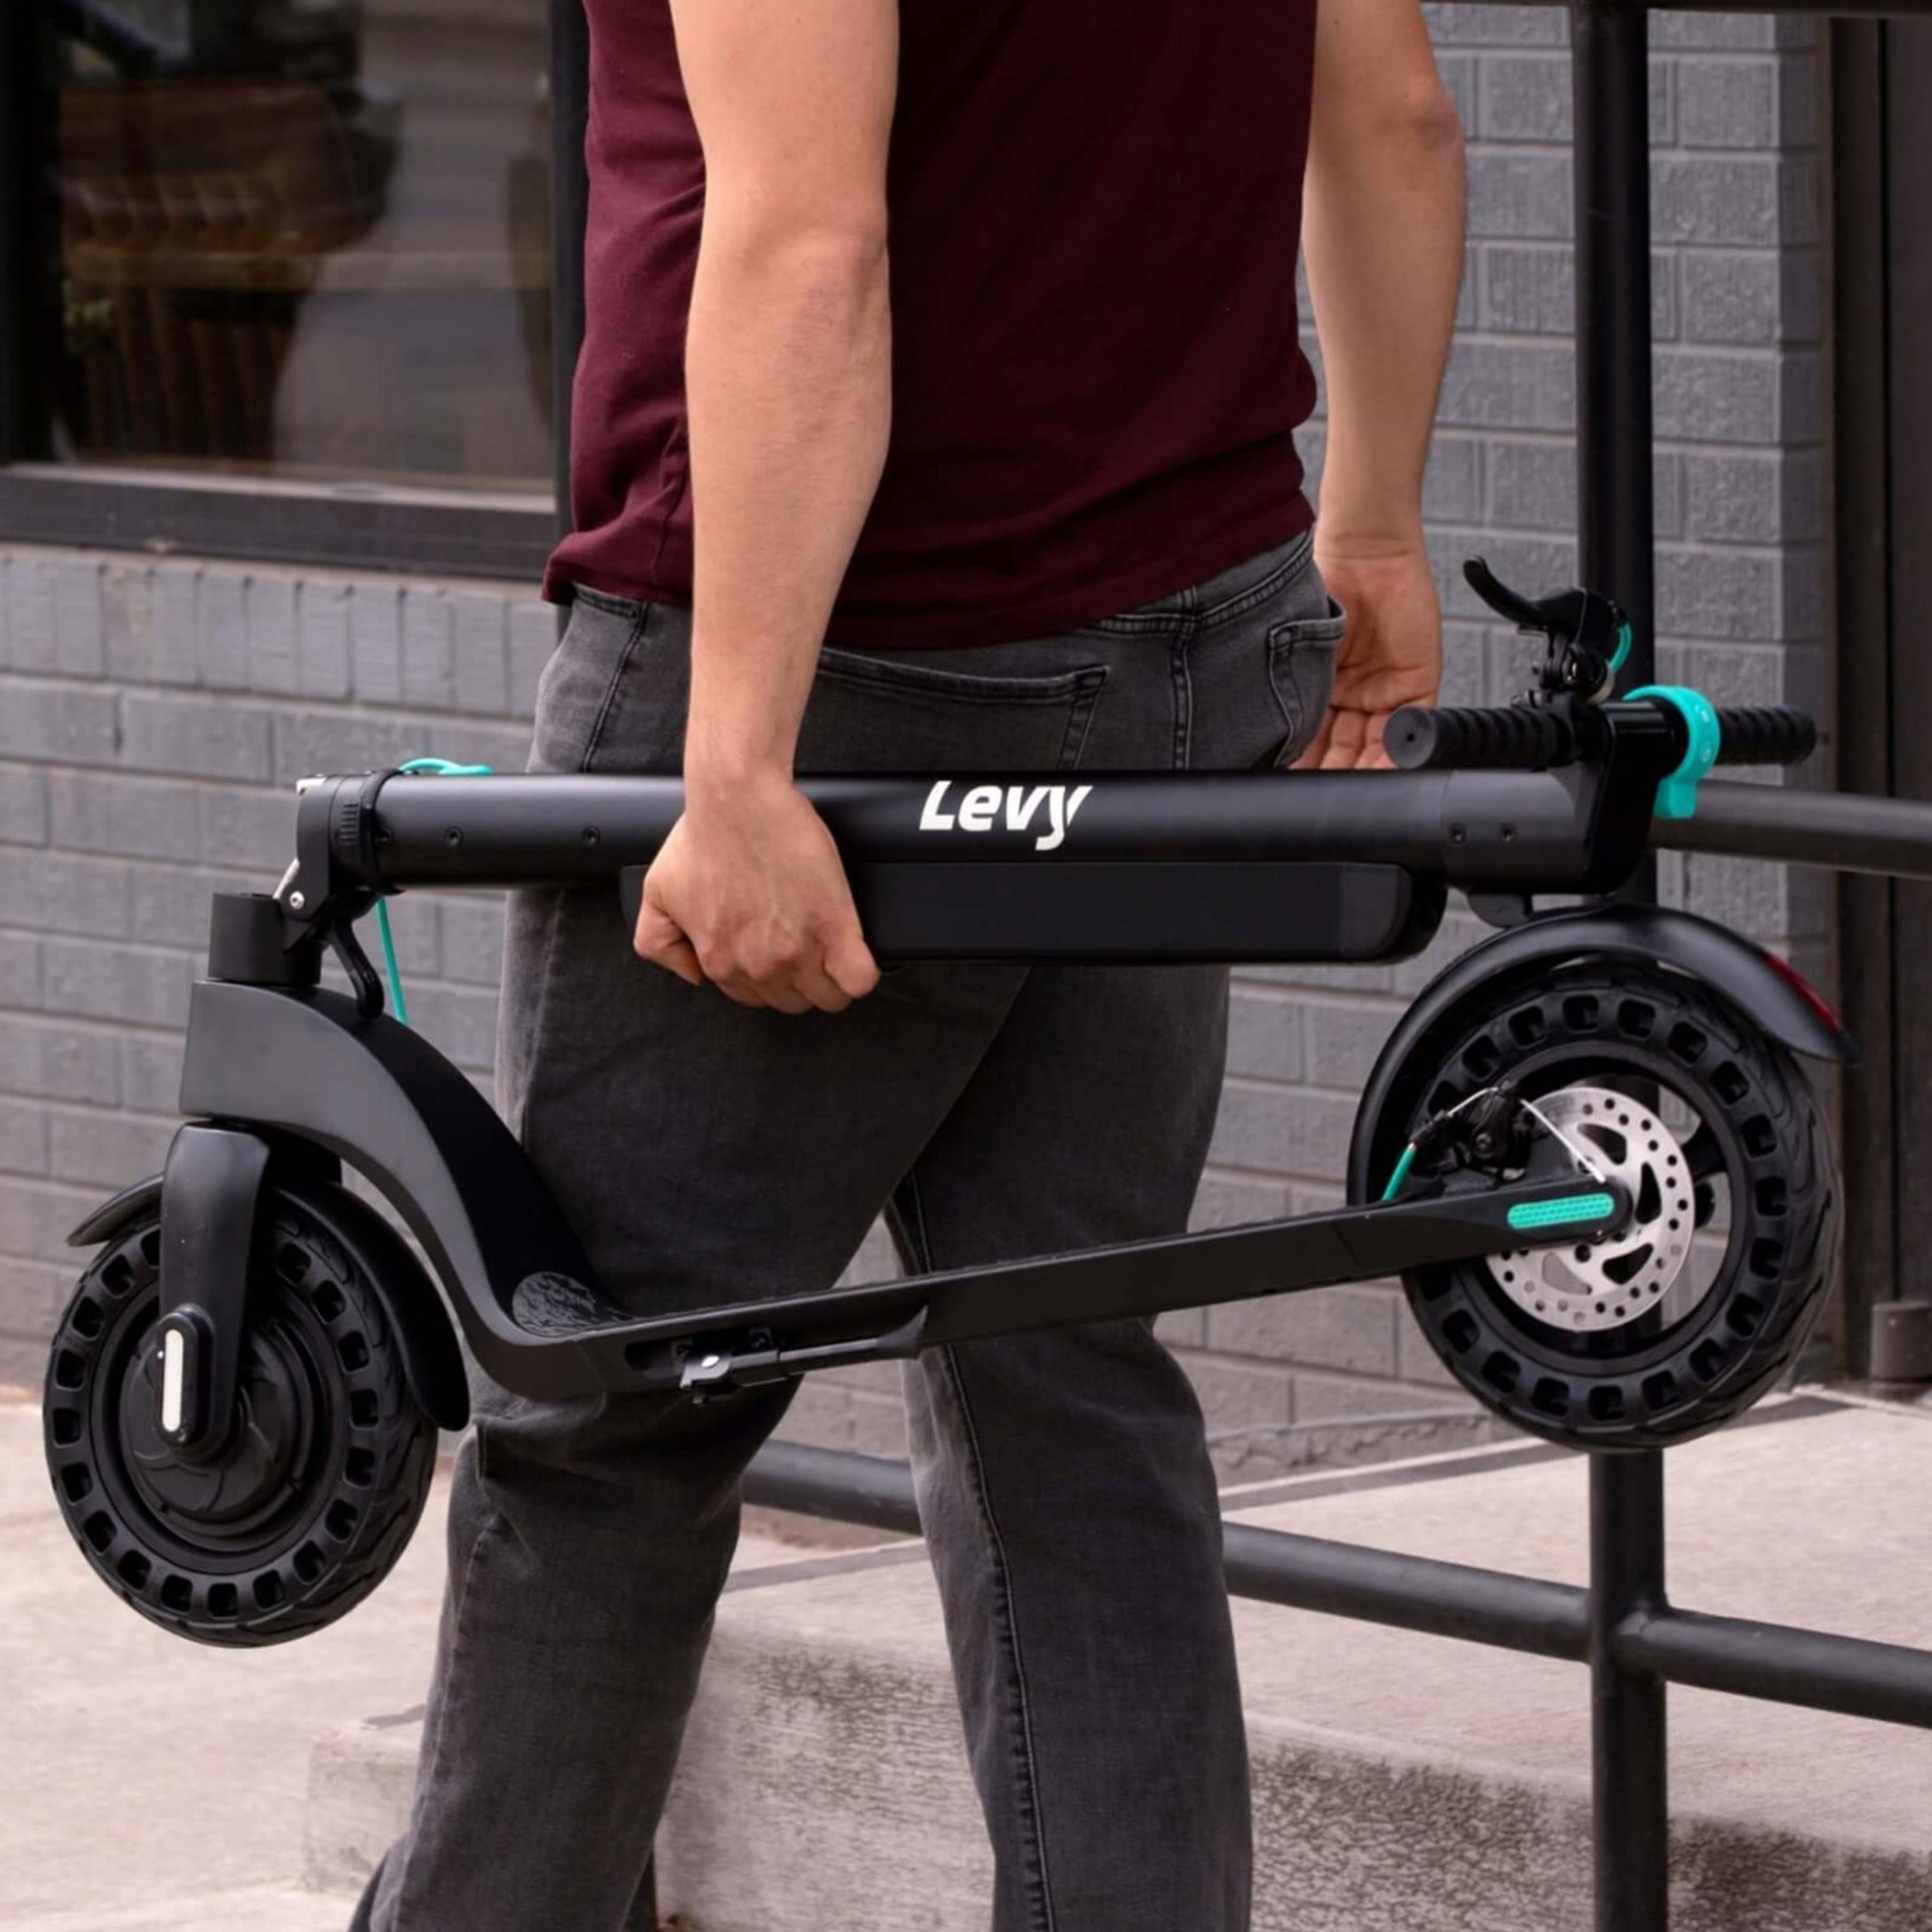 levy plus foldable escooter - Adventure Sports Innovation light weight